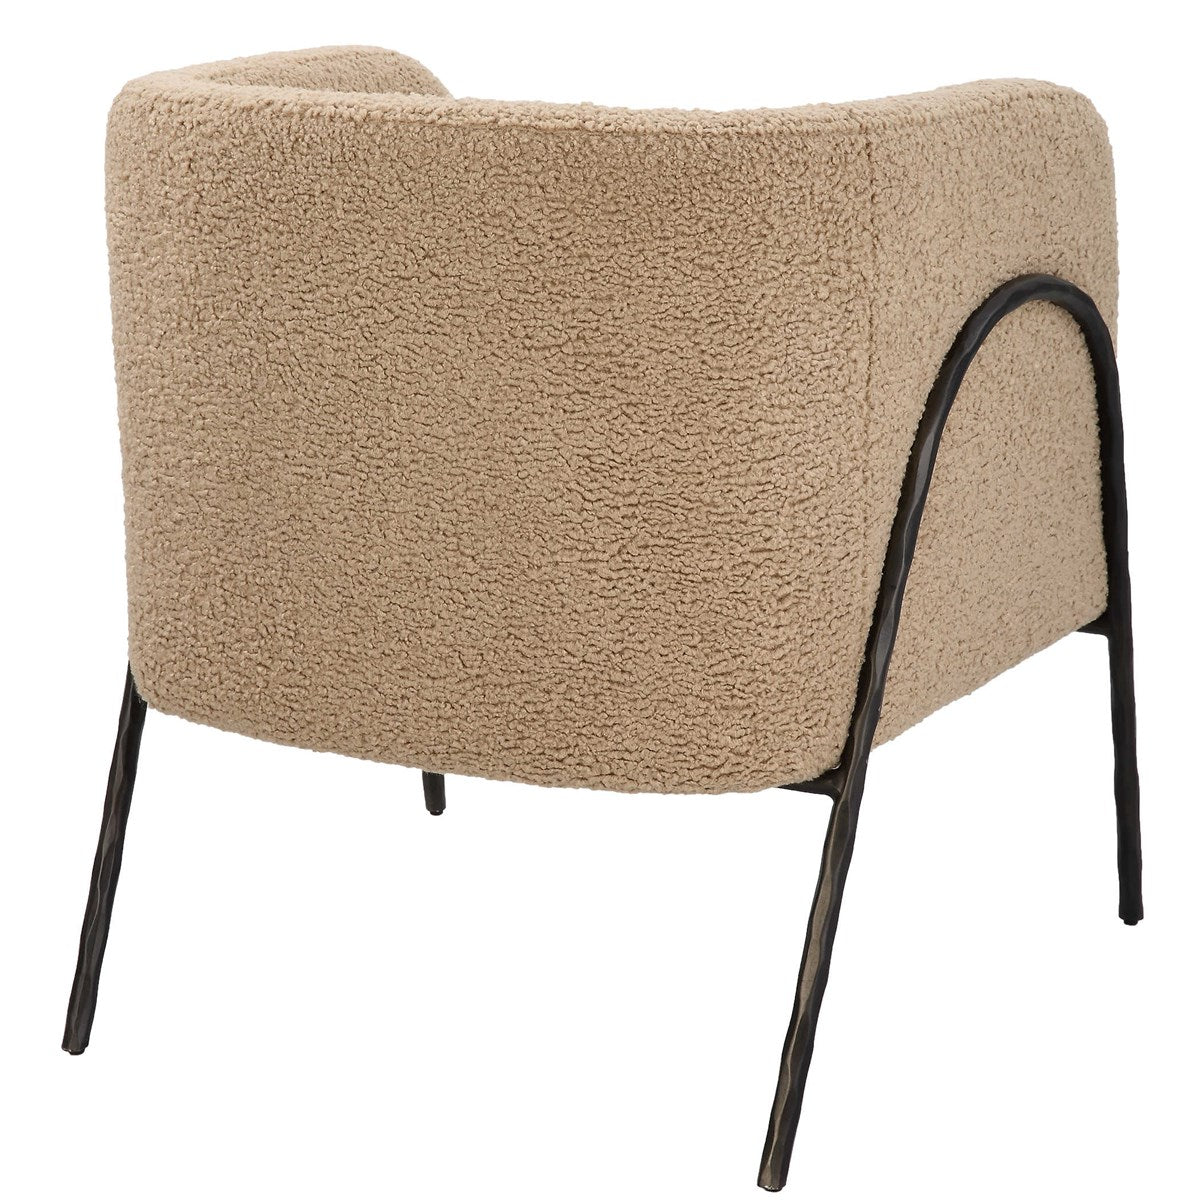 Jacobsen Accent Chair, Latte Shearling